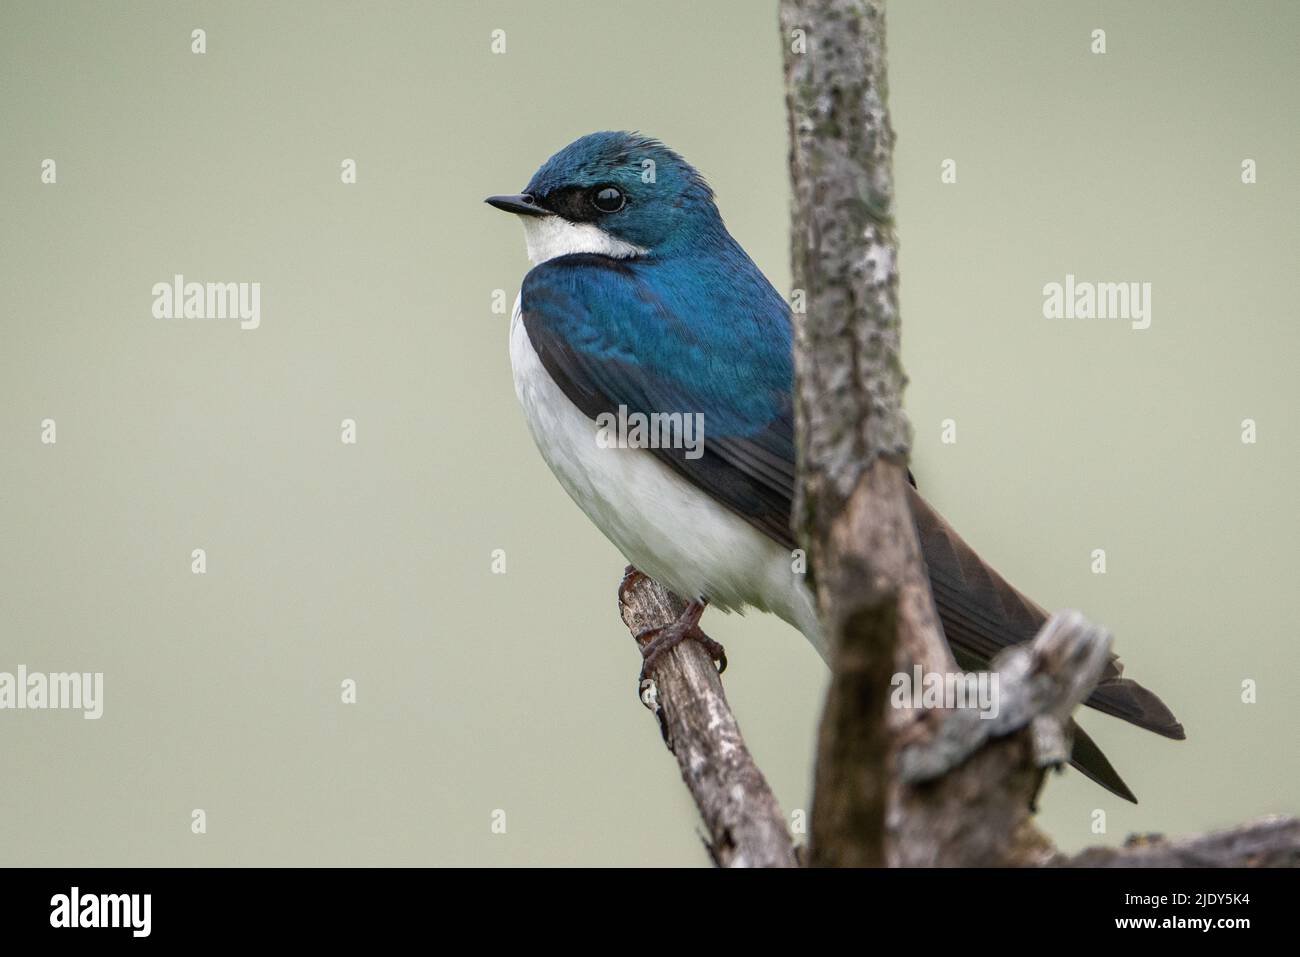 A tree swallow perched on a branch Stock Photo